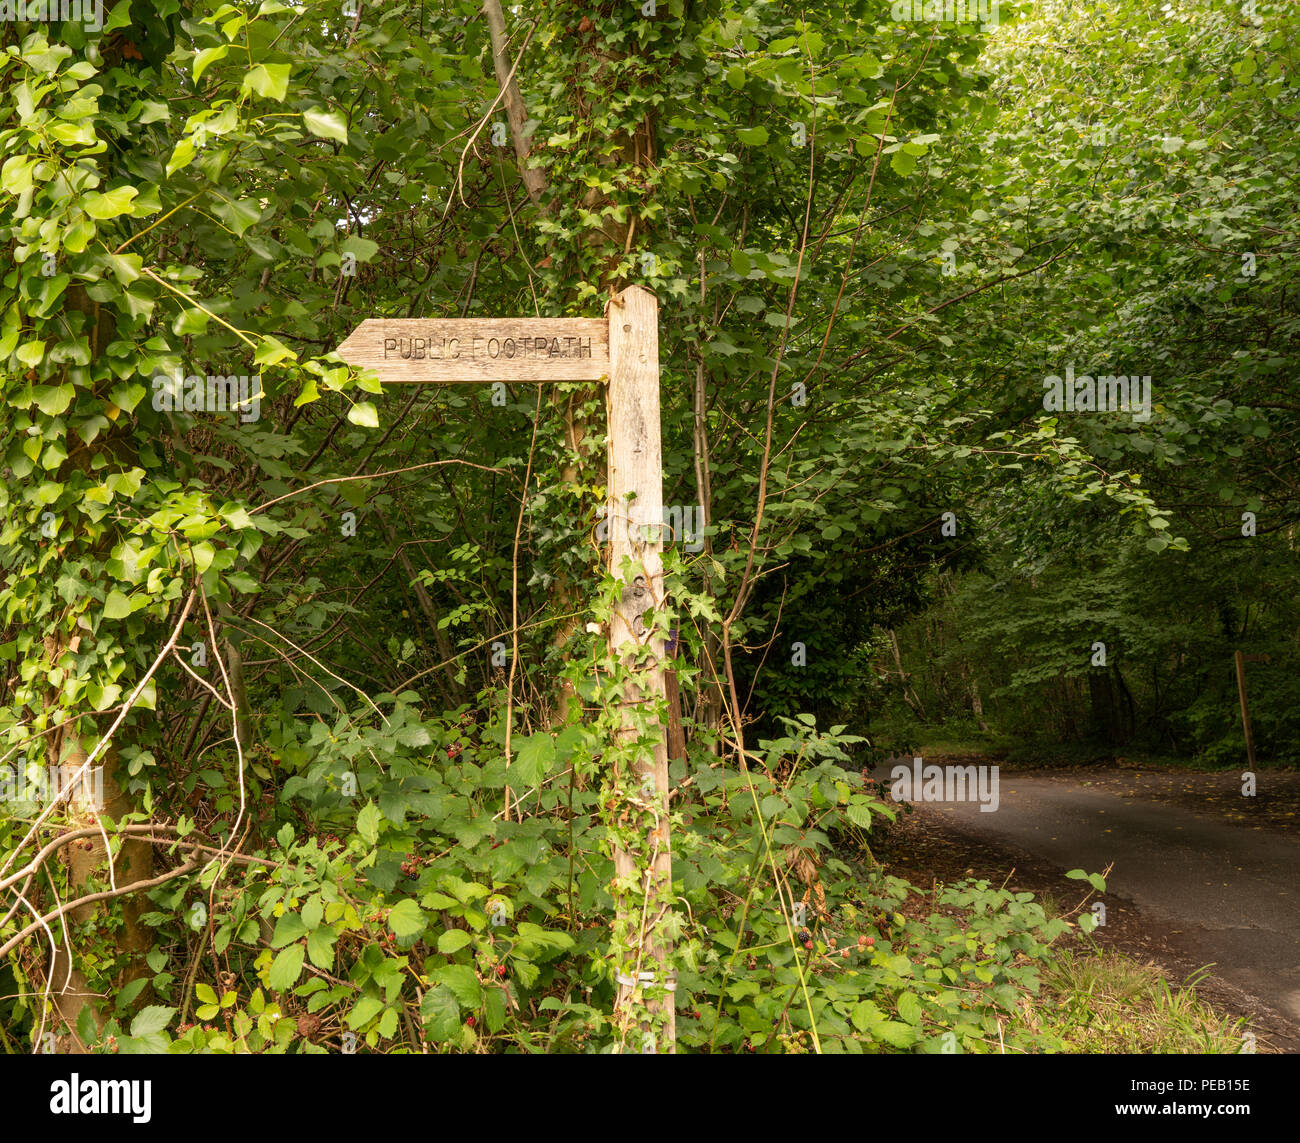 Finger post pointing to Binsted Woods, Arundel, Sussex: the site of a proposed bypass (Option 5A) for the A27: An environmentally sensitive project. Stock Photo